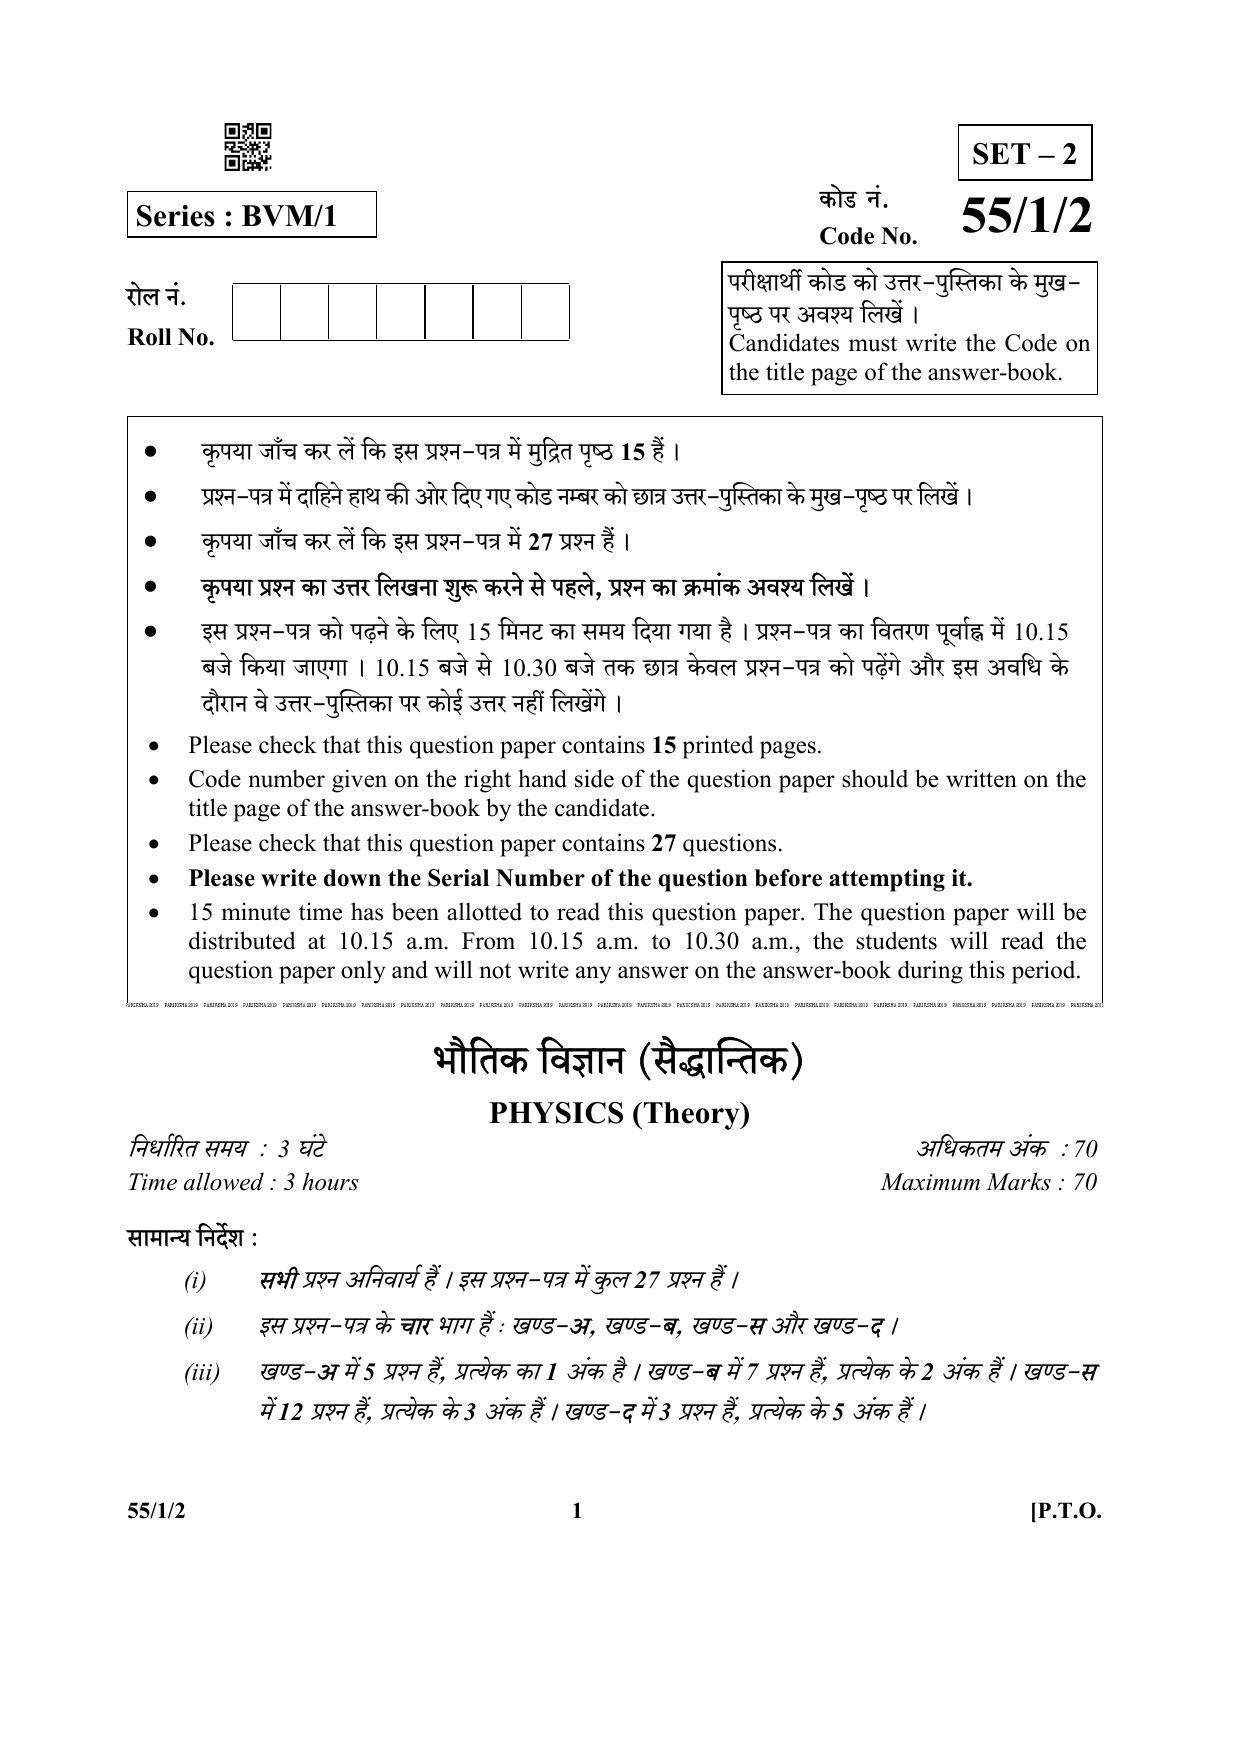 CBSE Class 12 55-1-2 (Physics) 2019 Question Paper - Page 1